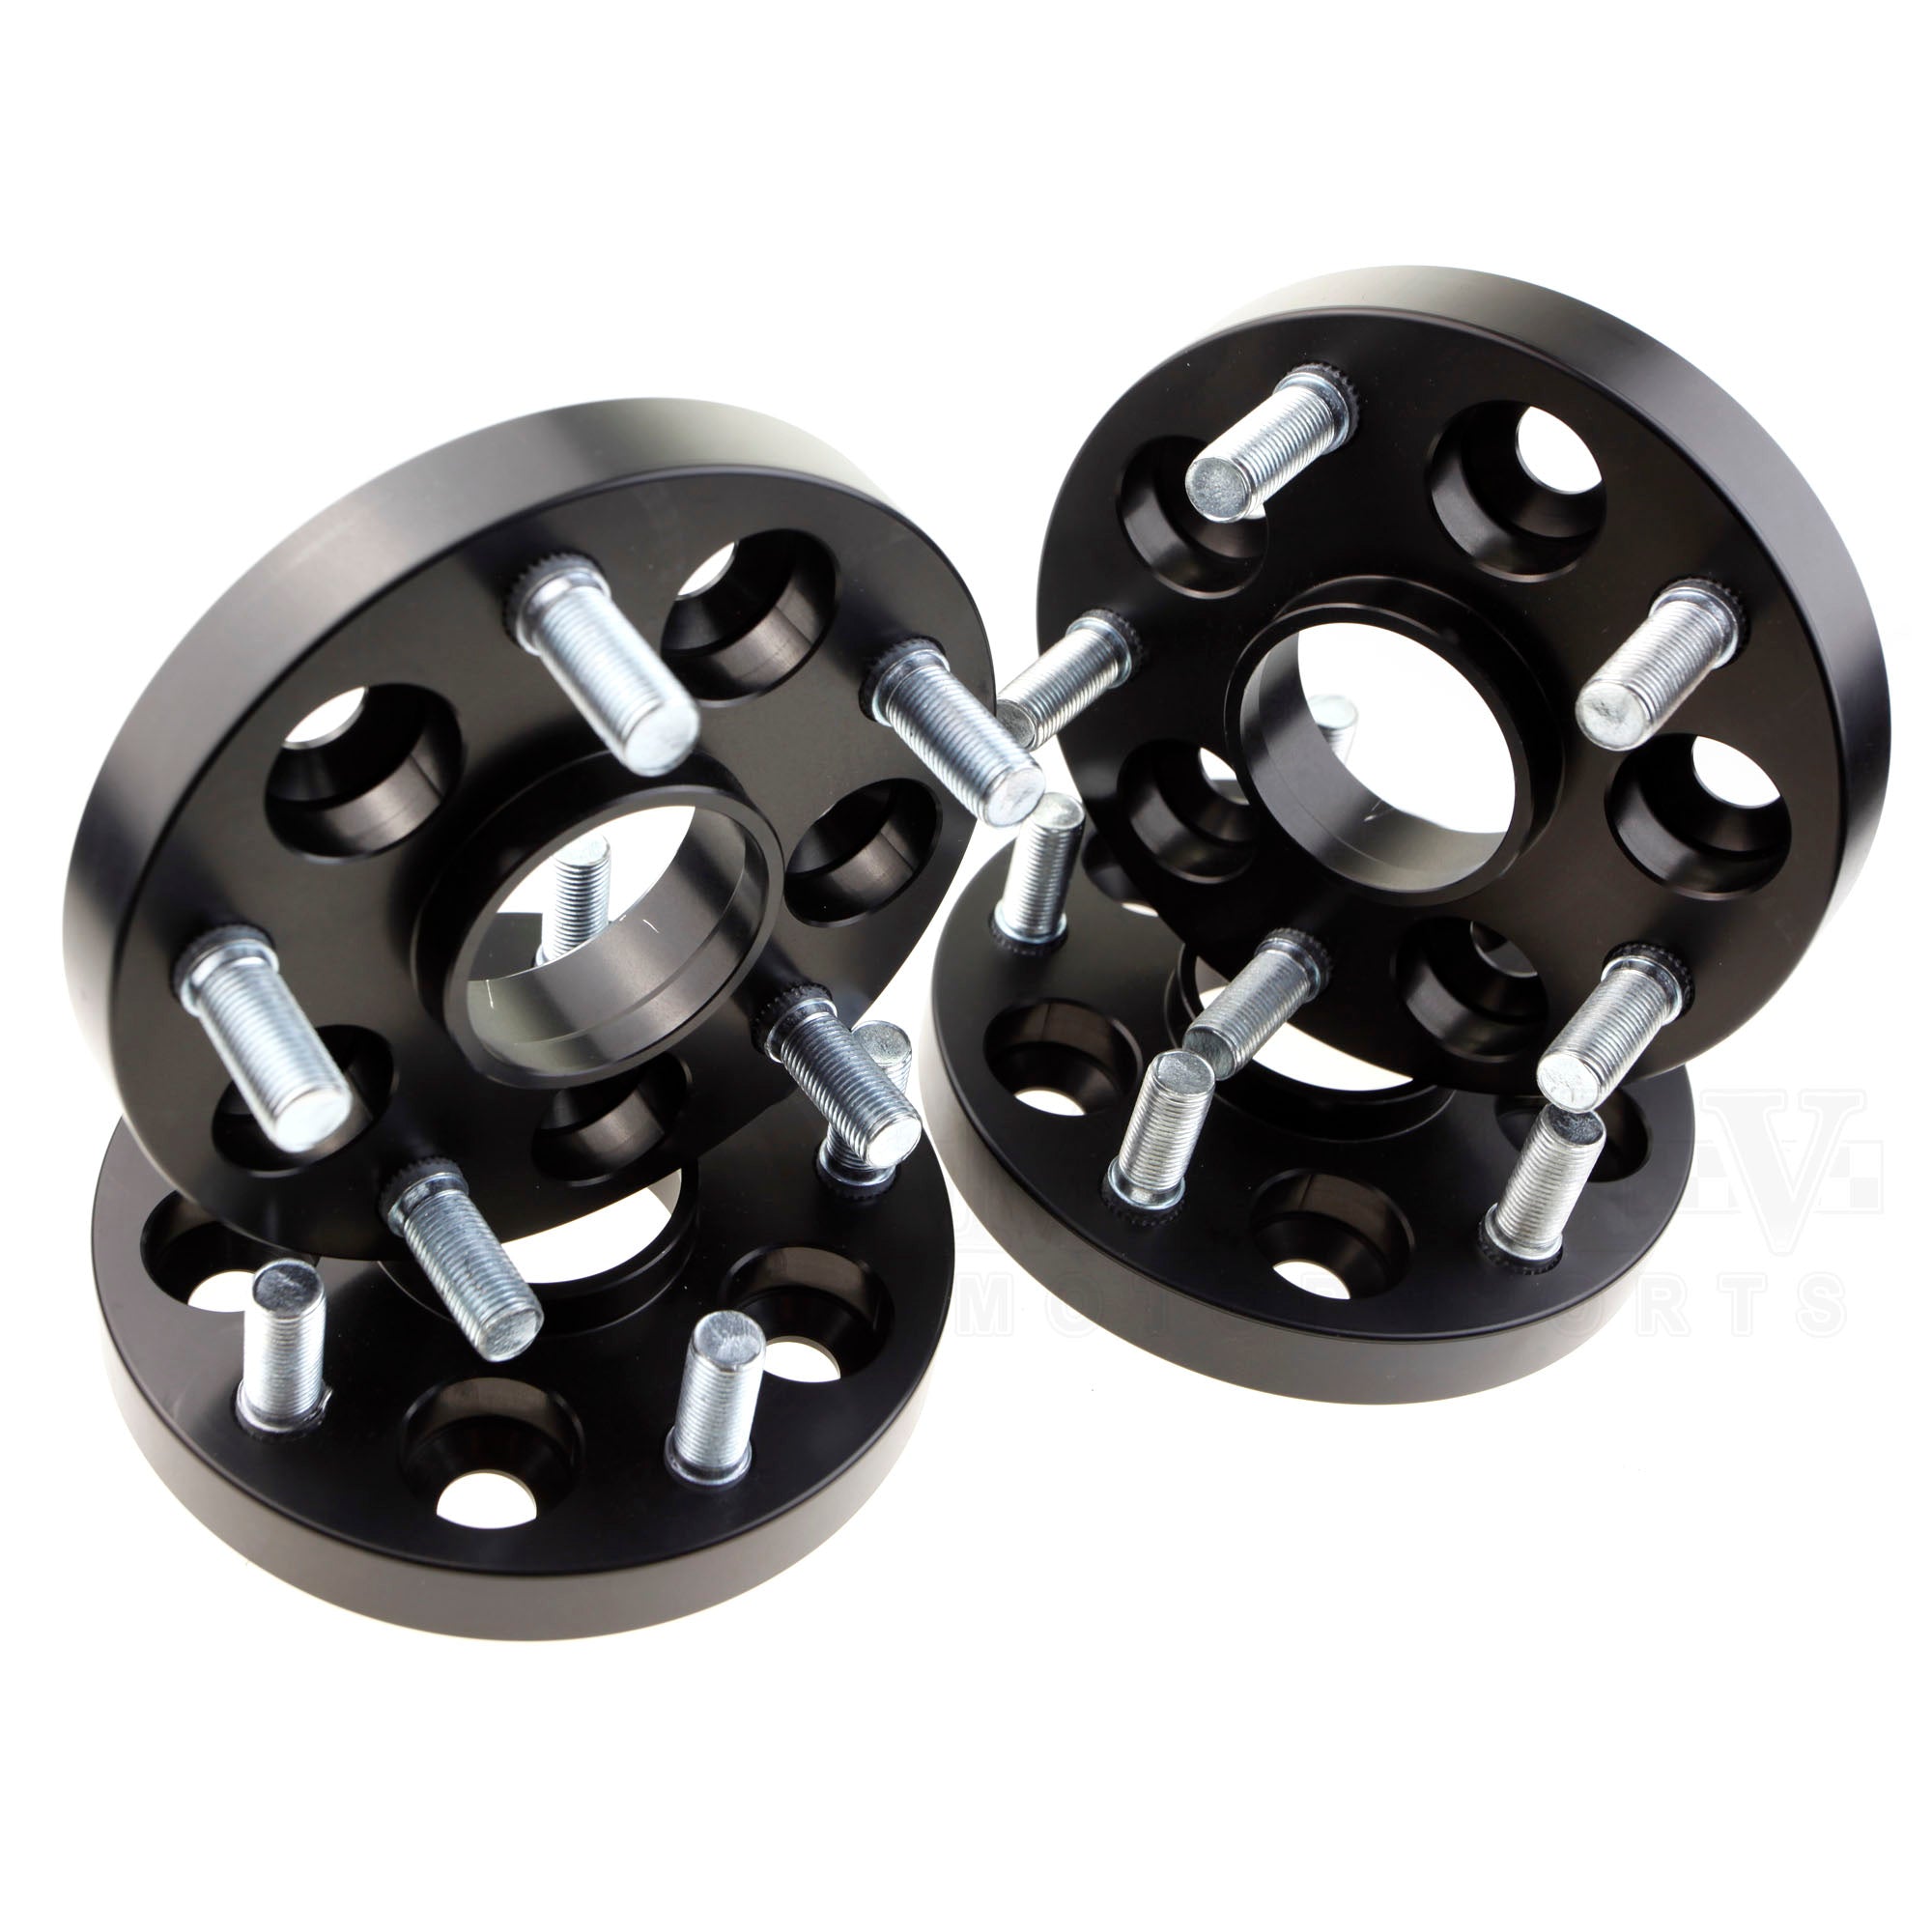 Mach V 5x100-to-5x114 Bolt Pattern Adapters